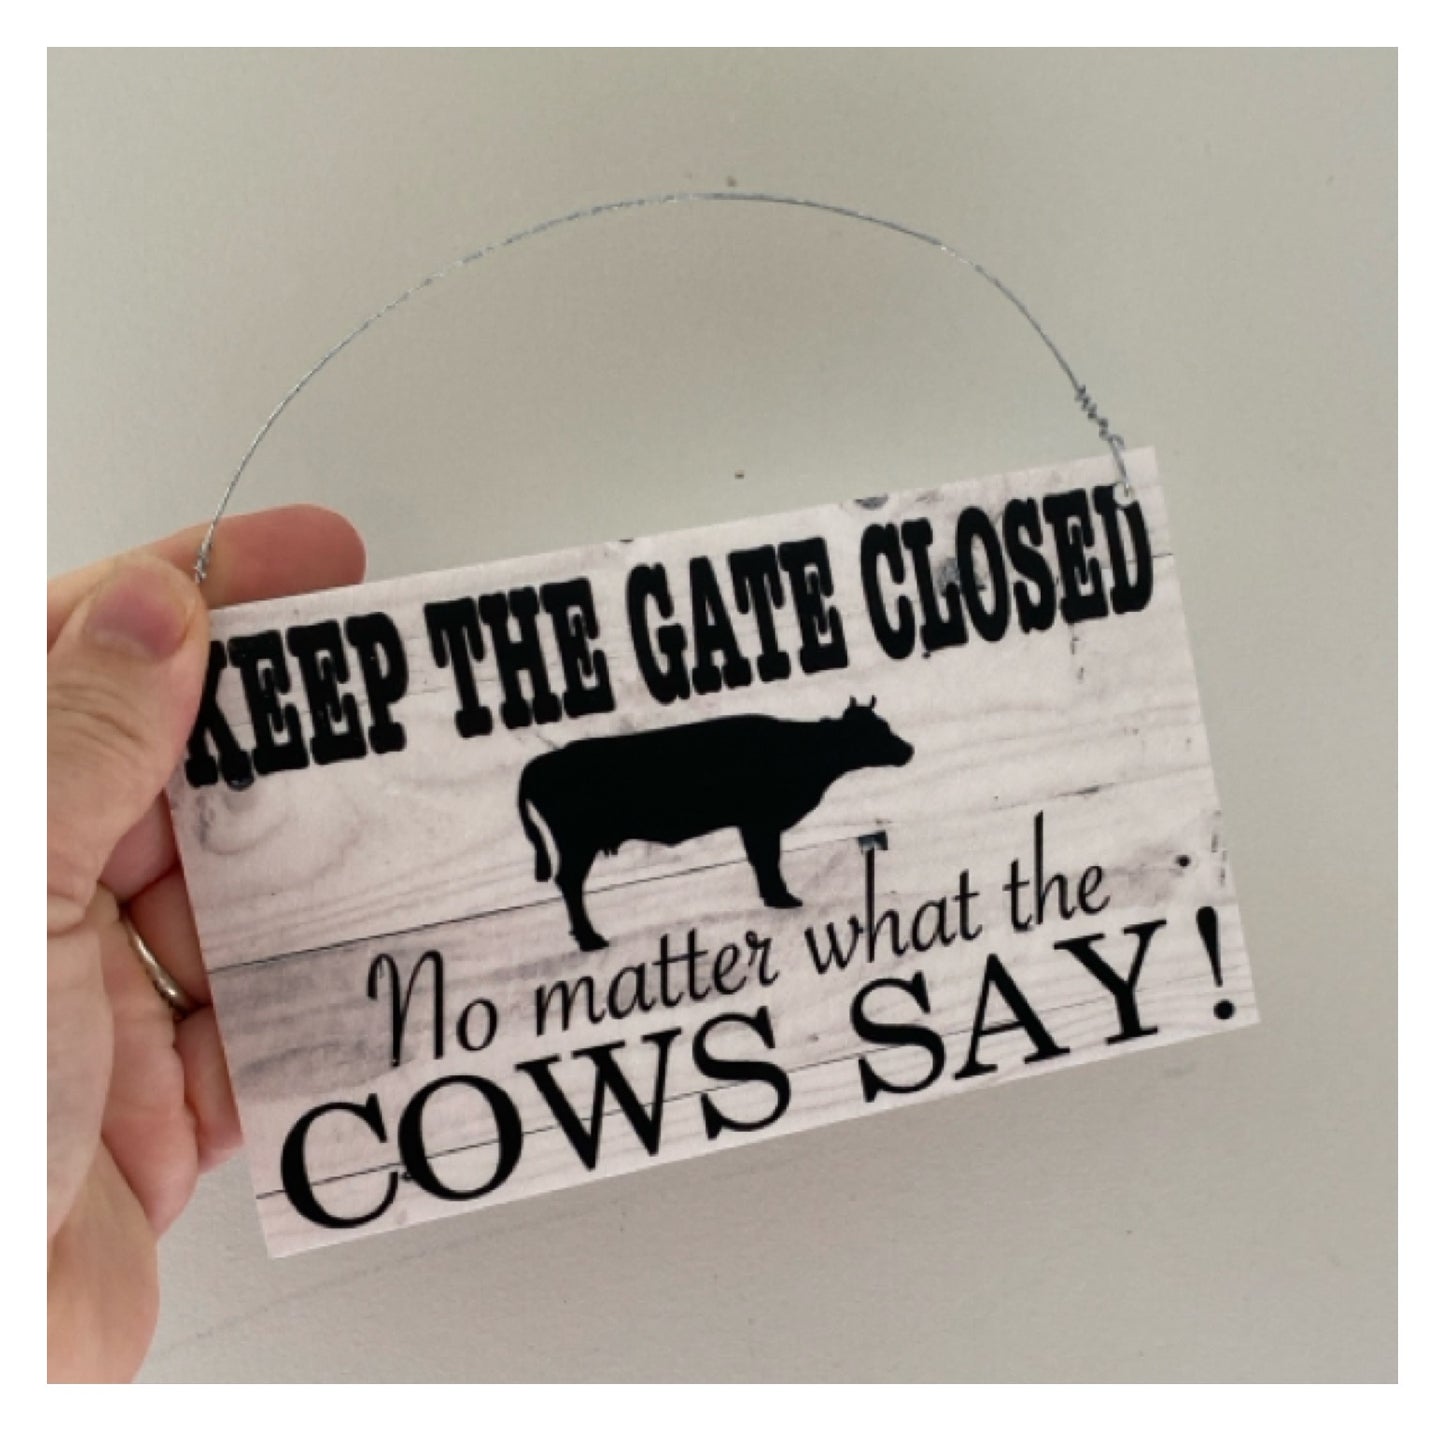 Keep Gate Closed Cows Say Sign - The Renmy Store Homewares & Gifts 